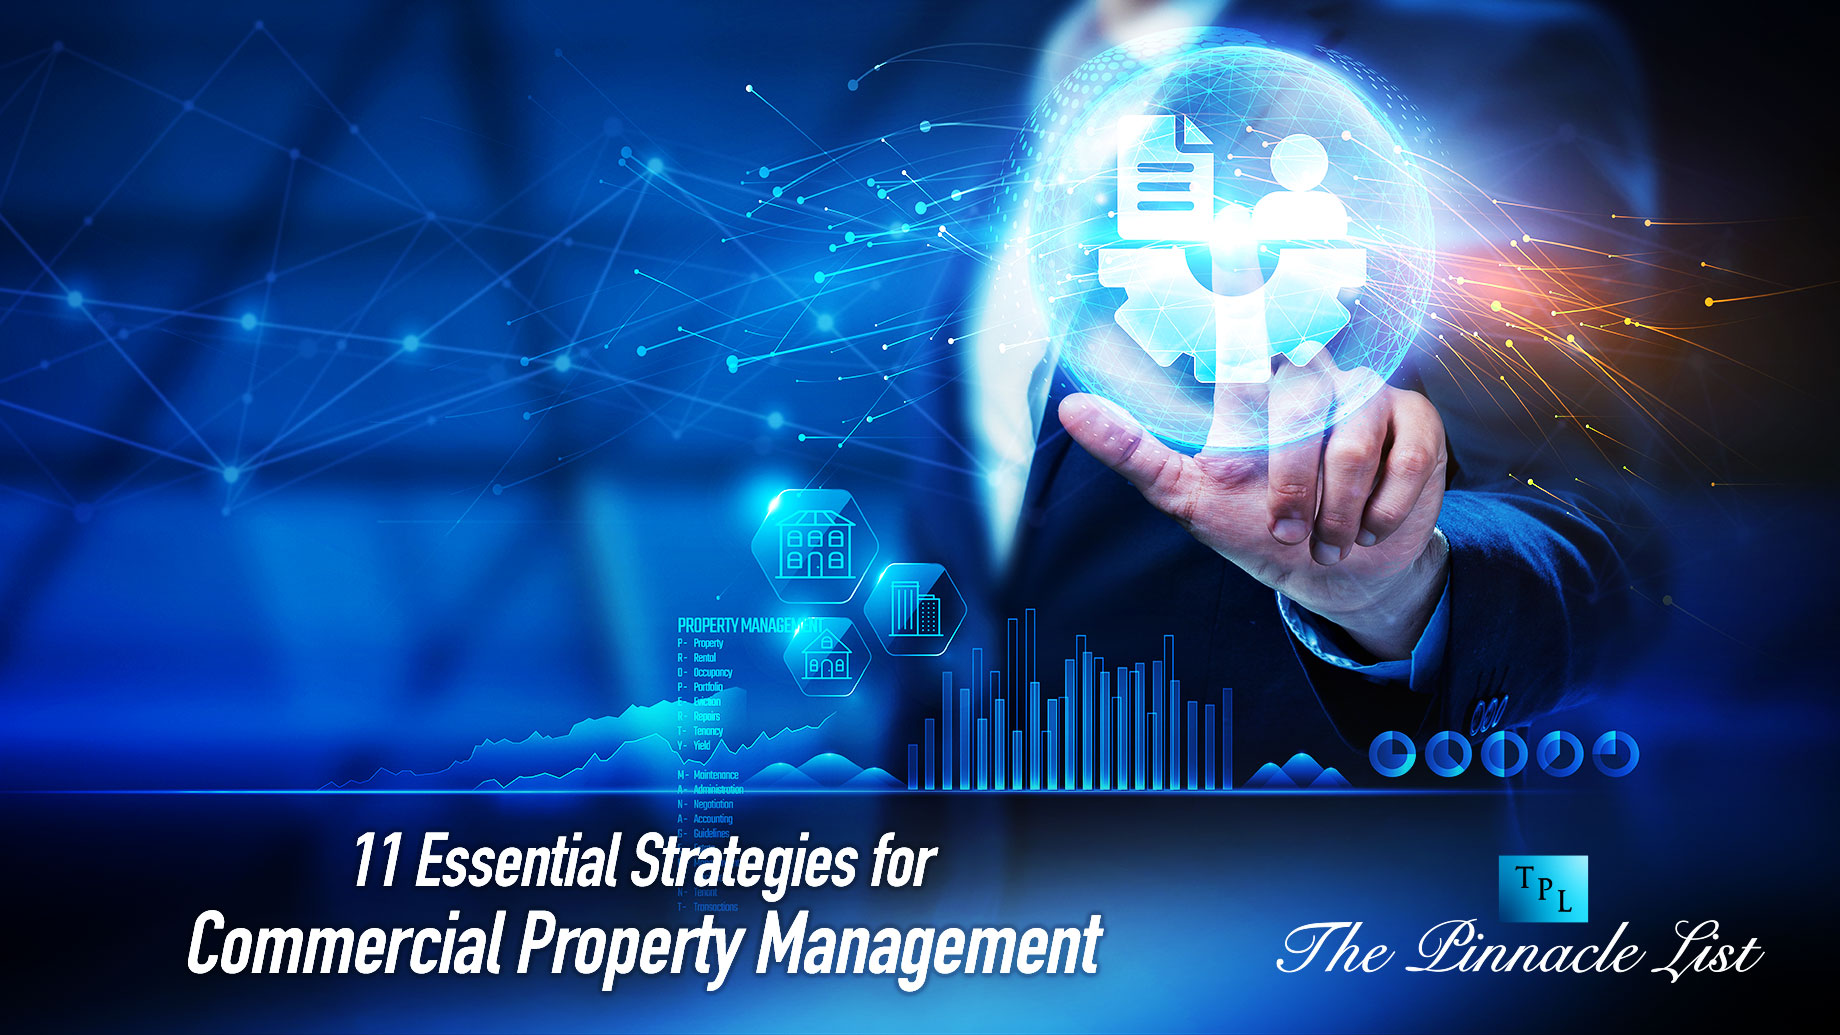 11 Essential Strategies for Commercial Property Management